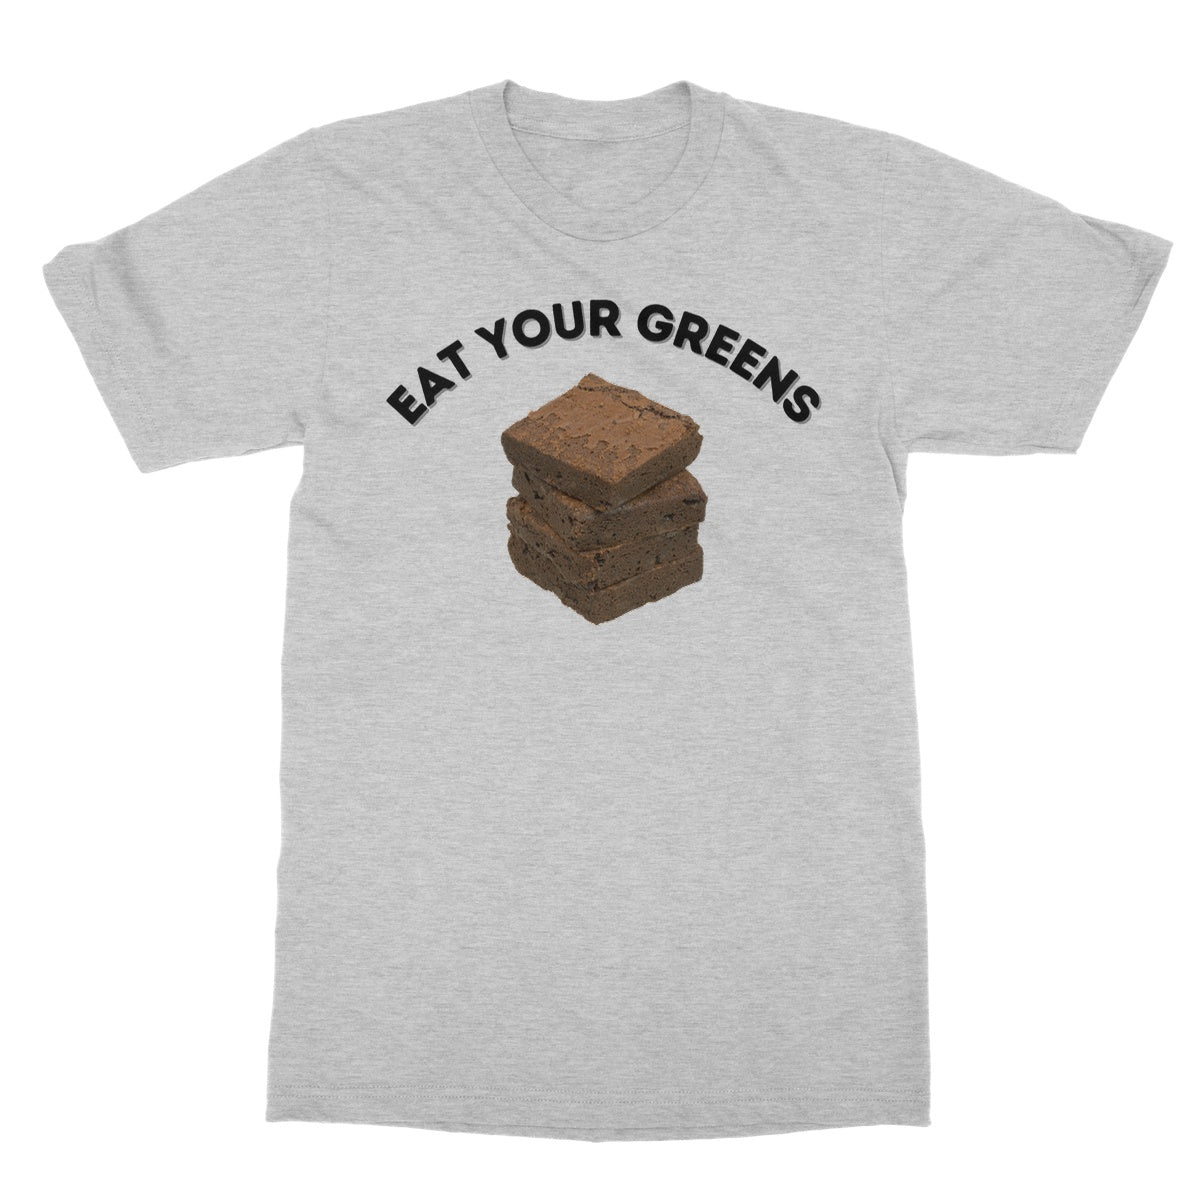 eat your greens t shirt grey